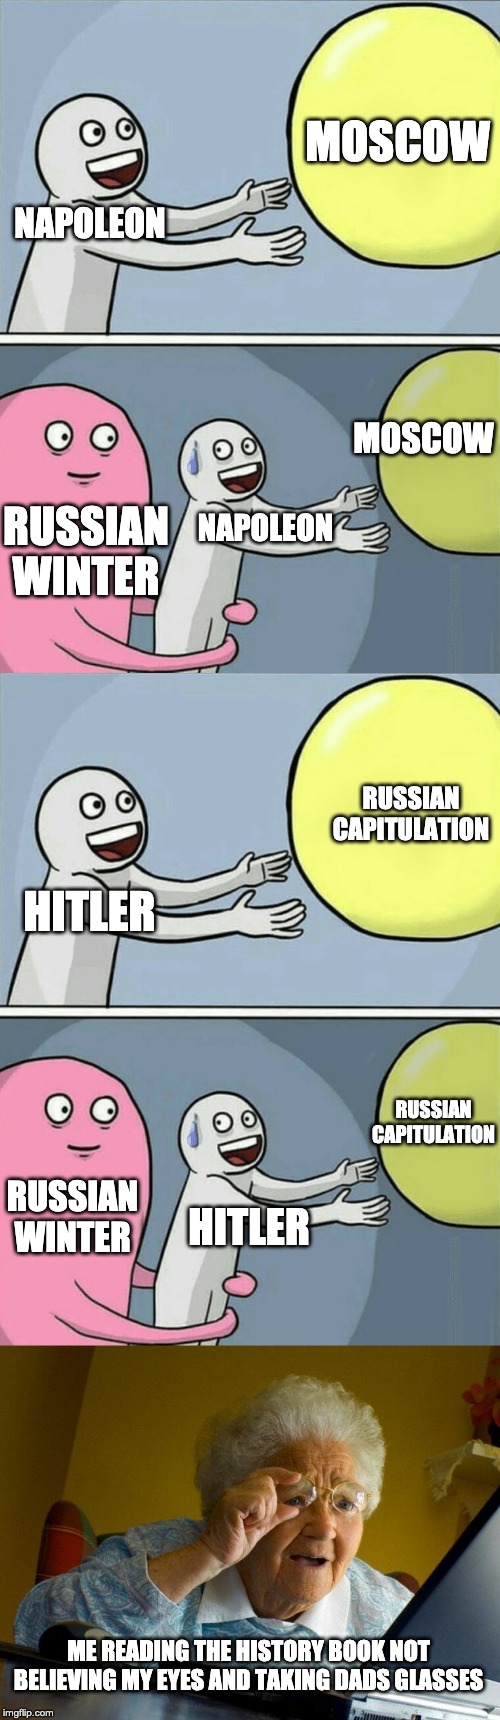  MOSCOW; NAPOLEON; MOSCOW; RUSSIAN WINTER; NAPOLEON; RUSSIAN CAPITULATION; HITLER; RUSSIAN CAPITULATION; RUSSIAN WINTER; HITLER; ME READING THE HISTORY BOOK NOT BELIEVING MY EYES AND TAKING DADS GLASSES | image tagged in memes,grandma finds the internet,running away balloon | made w/ Imgflip meme maker